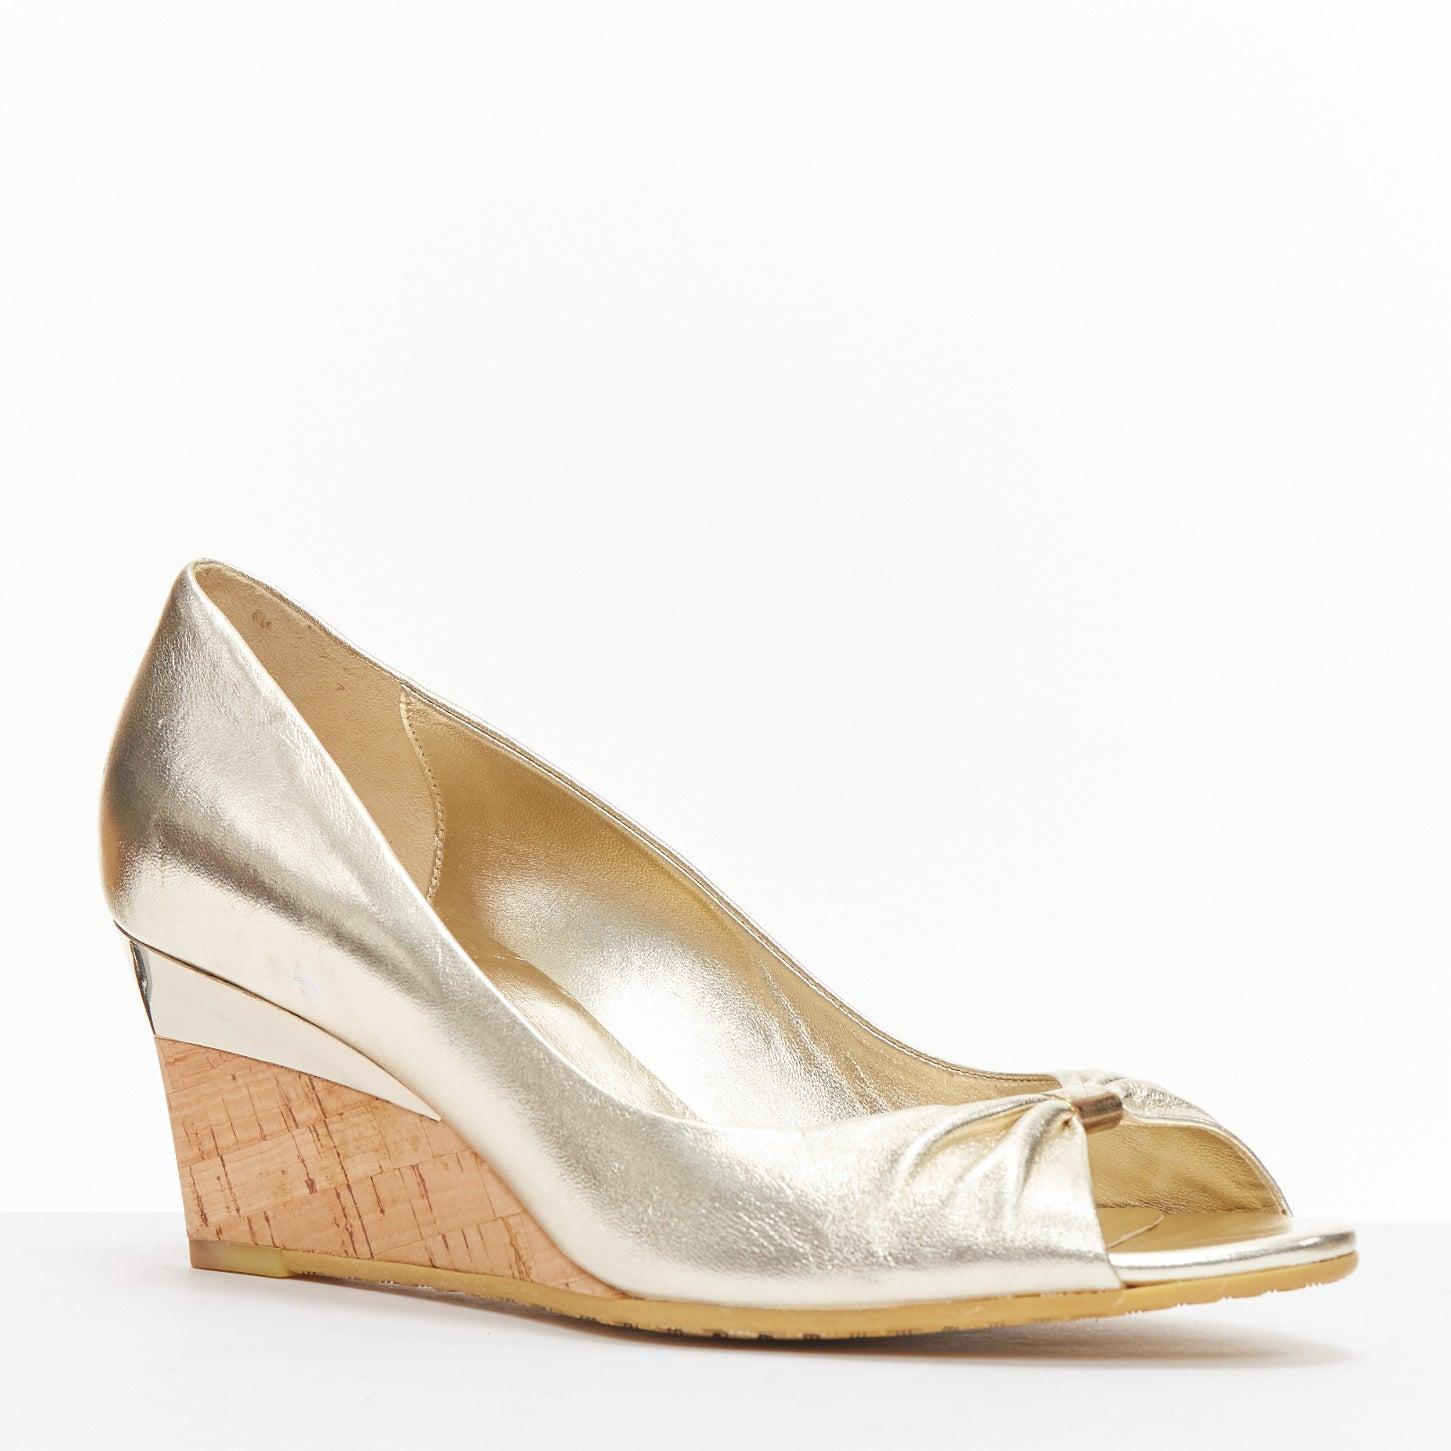 GUCCI metallic gold leather bow open toe cord metal wedge mid heel EU36.5
Reference: CELG/A00361
Brand: Gucci
Material: Leather, Cork
Color: Gold, Brown
Pattern: Solid
Extra Details: Metallic gold upper. Ruched bow detail o[pen toe. Gucci embossed